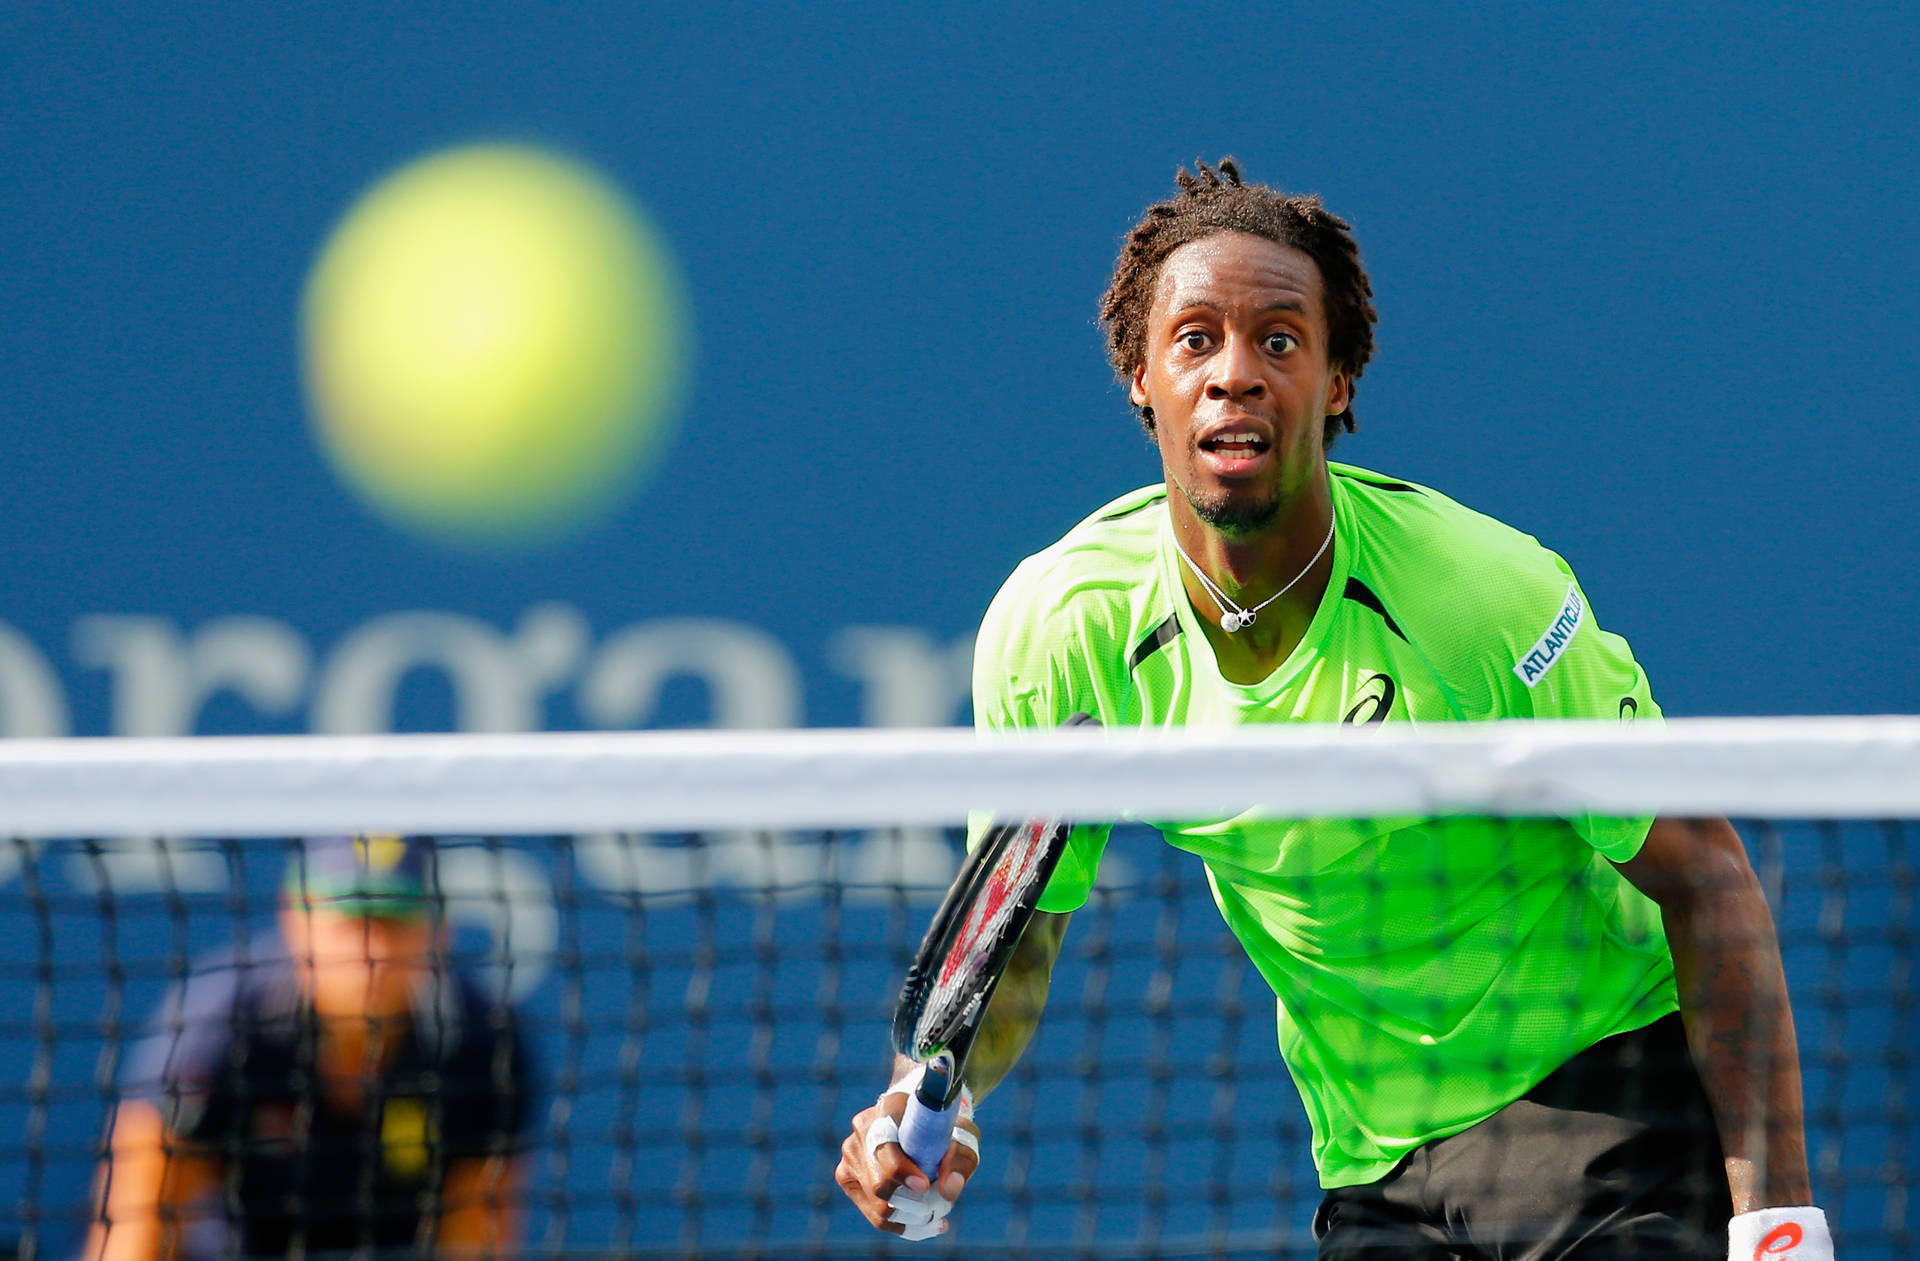 Gael Monfils in Action at a Professional Tennis Match Wallpaper